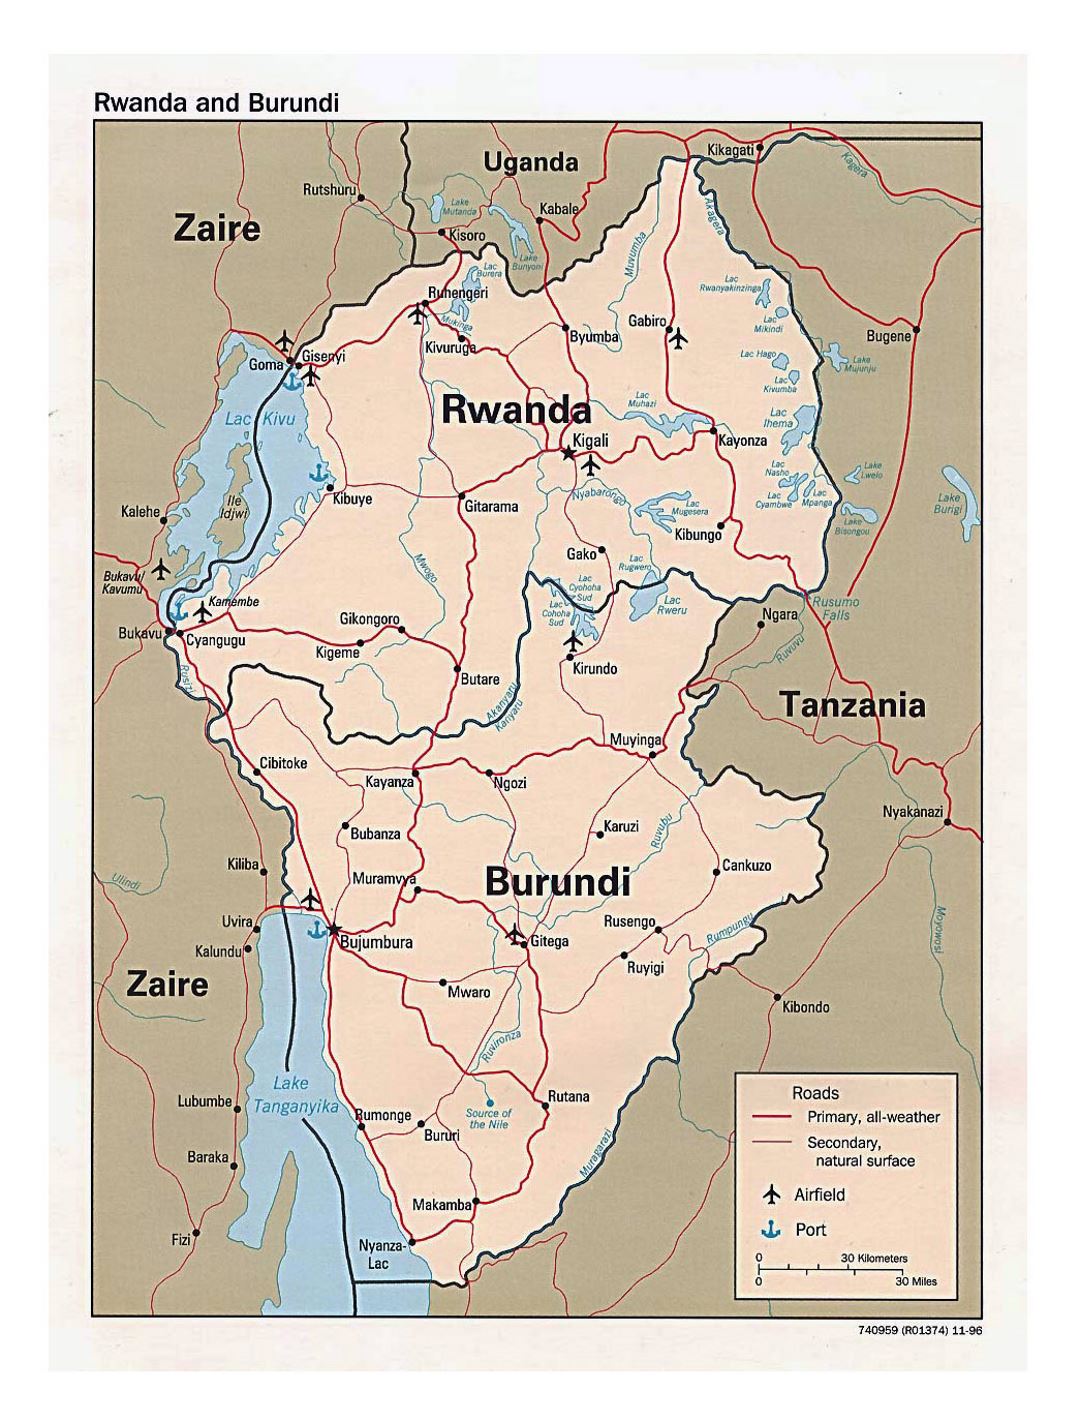 Detailed political map of Rwanda and Burundi with roads, major cities, airports and ports - 1996